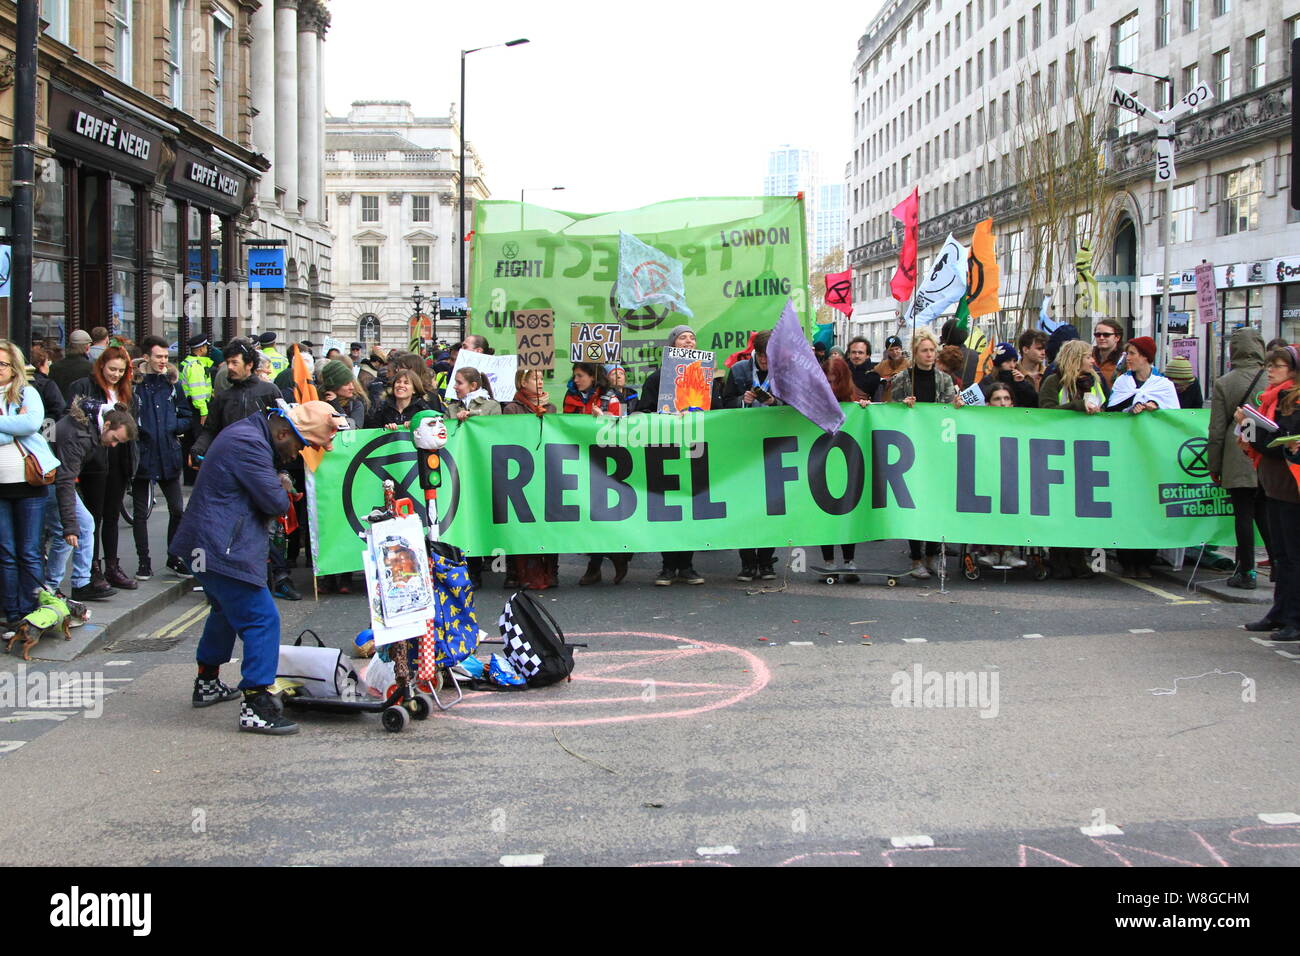 EXTINCTION REBELLION PROTEST BRINGS MUCH OF CENTRAL LONDON TO A HALT. ROAD CLOSURES AS DEPICTED IN THIS PICTURE AT WATERLOO BRIDGE BY A SMALL NUMBER OF PEOPLE HOLDING A REBEL FOR LIFE SIGN. THE TACTIC DESIGNED TO BRING AWARENESS TO HUMAN INDUCED CLIMATE CHANGE. Stock Photo